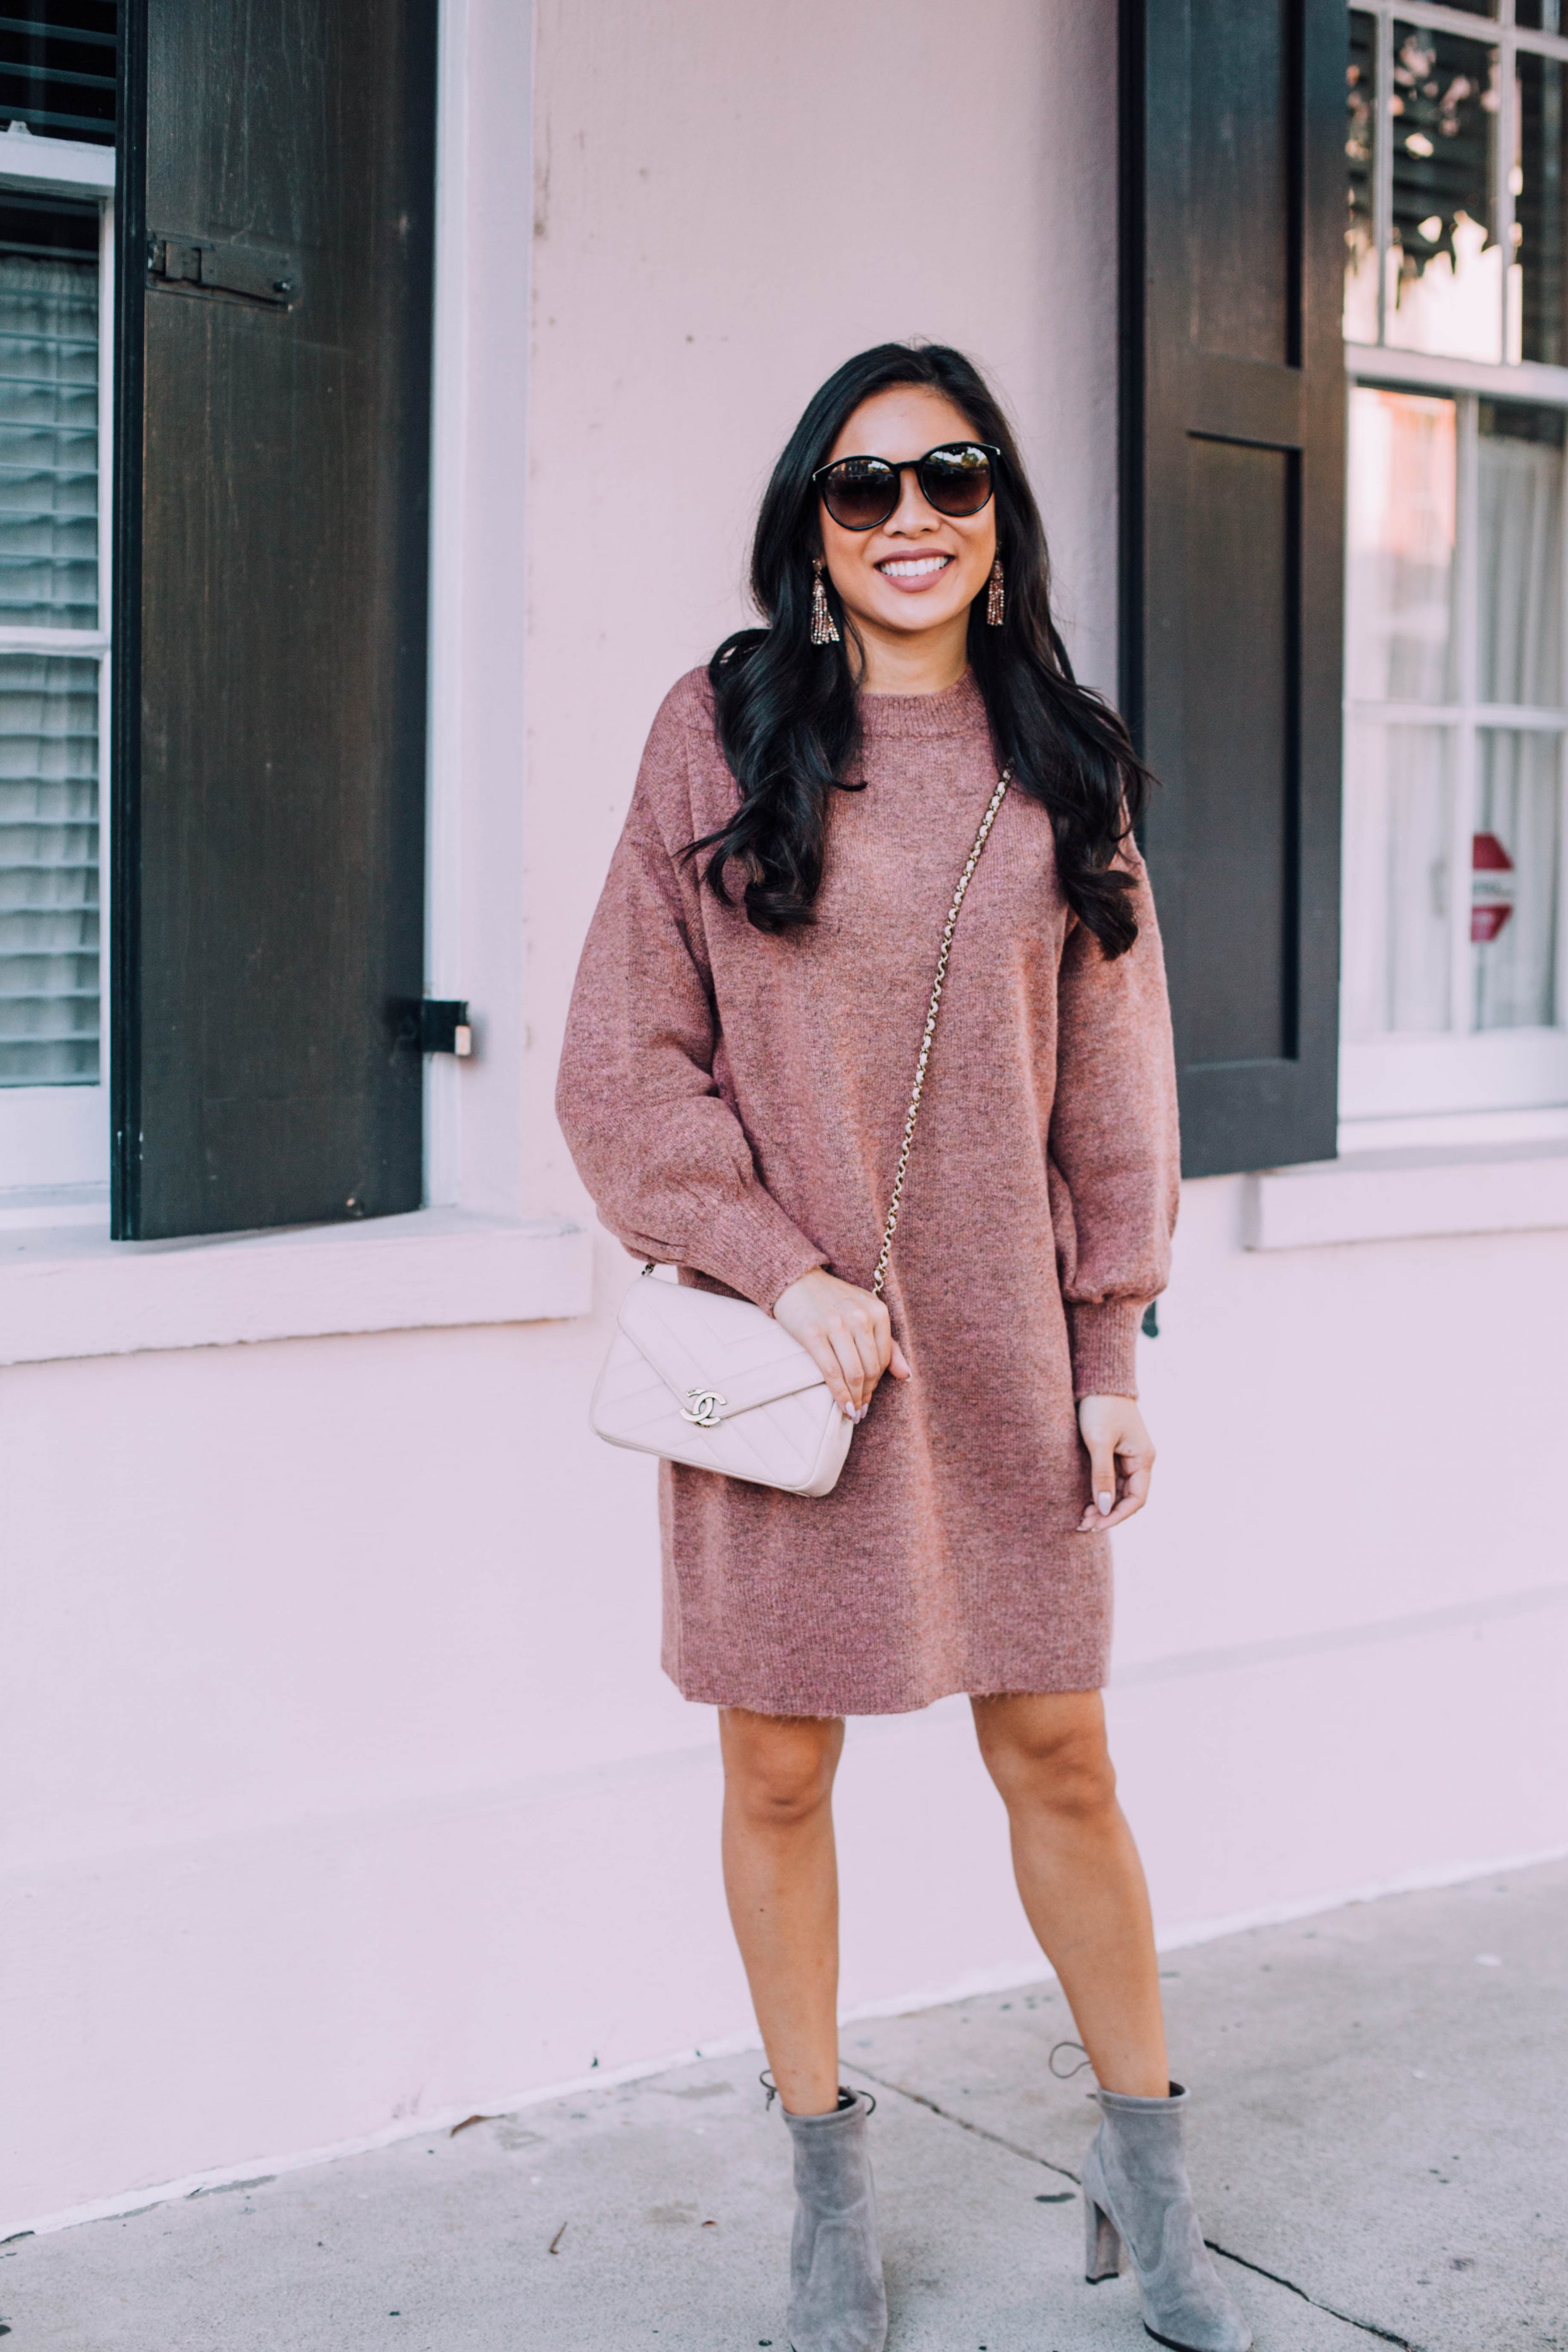 Mauve sweater dress and gray booties with Chanel bag and Baublebar tassel earrings